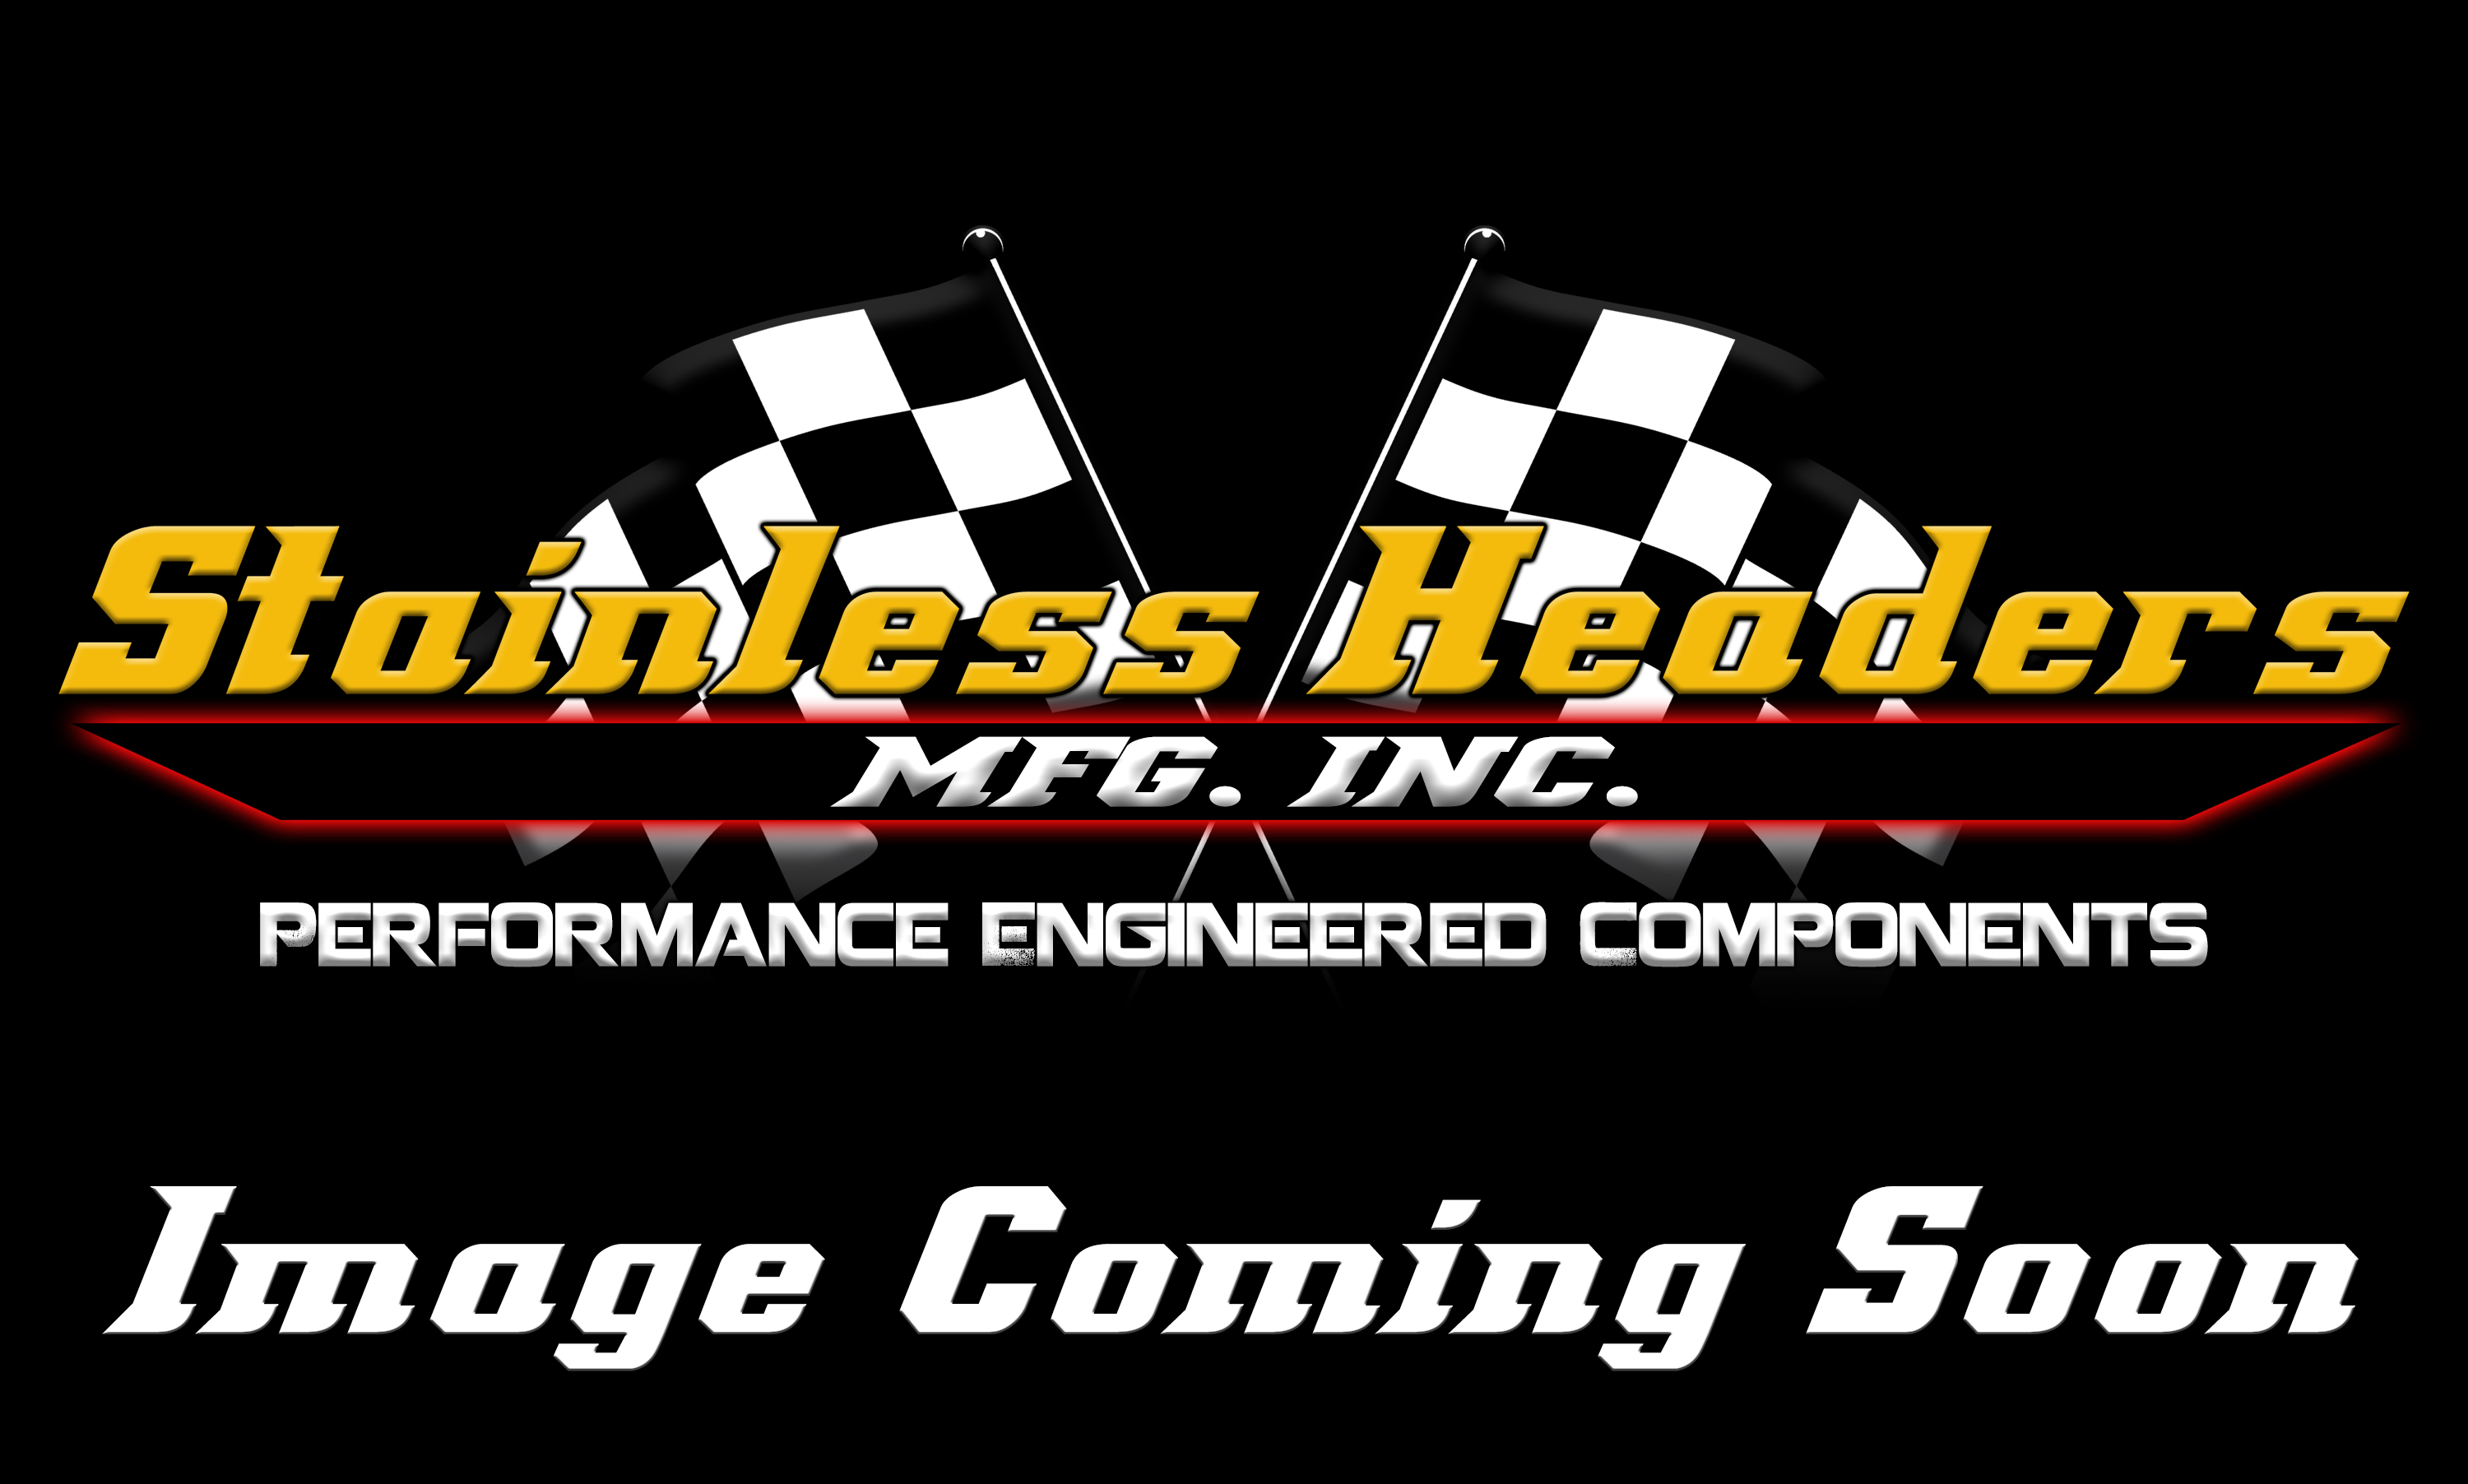 CompTurbo Technologies - CTR4202R-7285 Mid Frame Oil-Less 3.0 Turbocharger (1250 HP) - Image 3